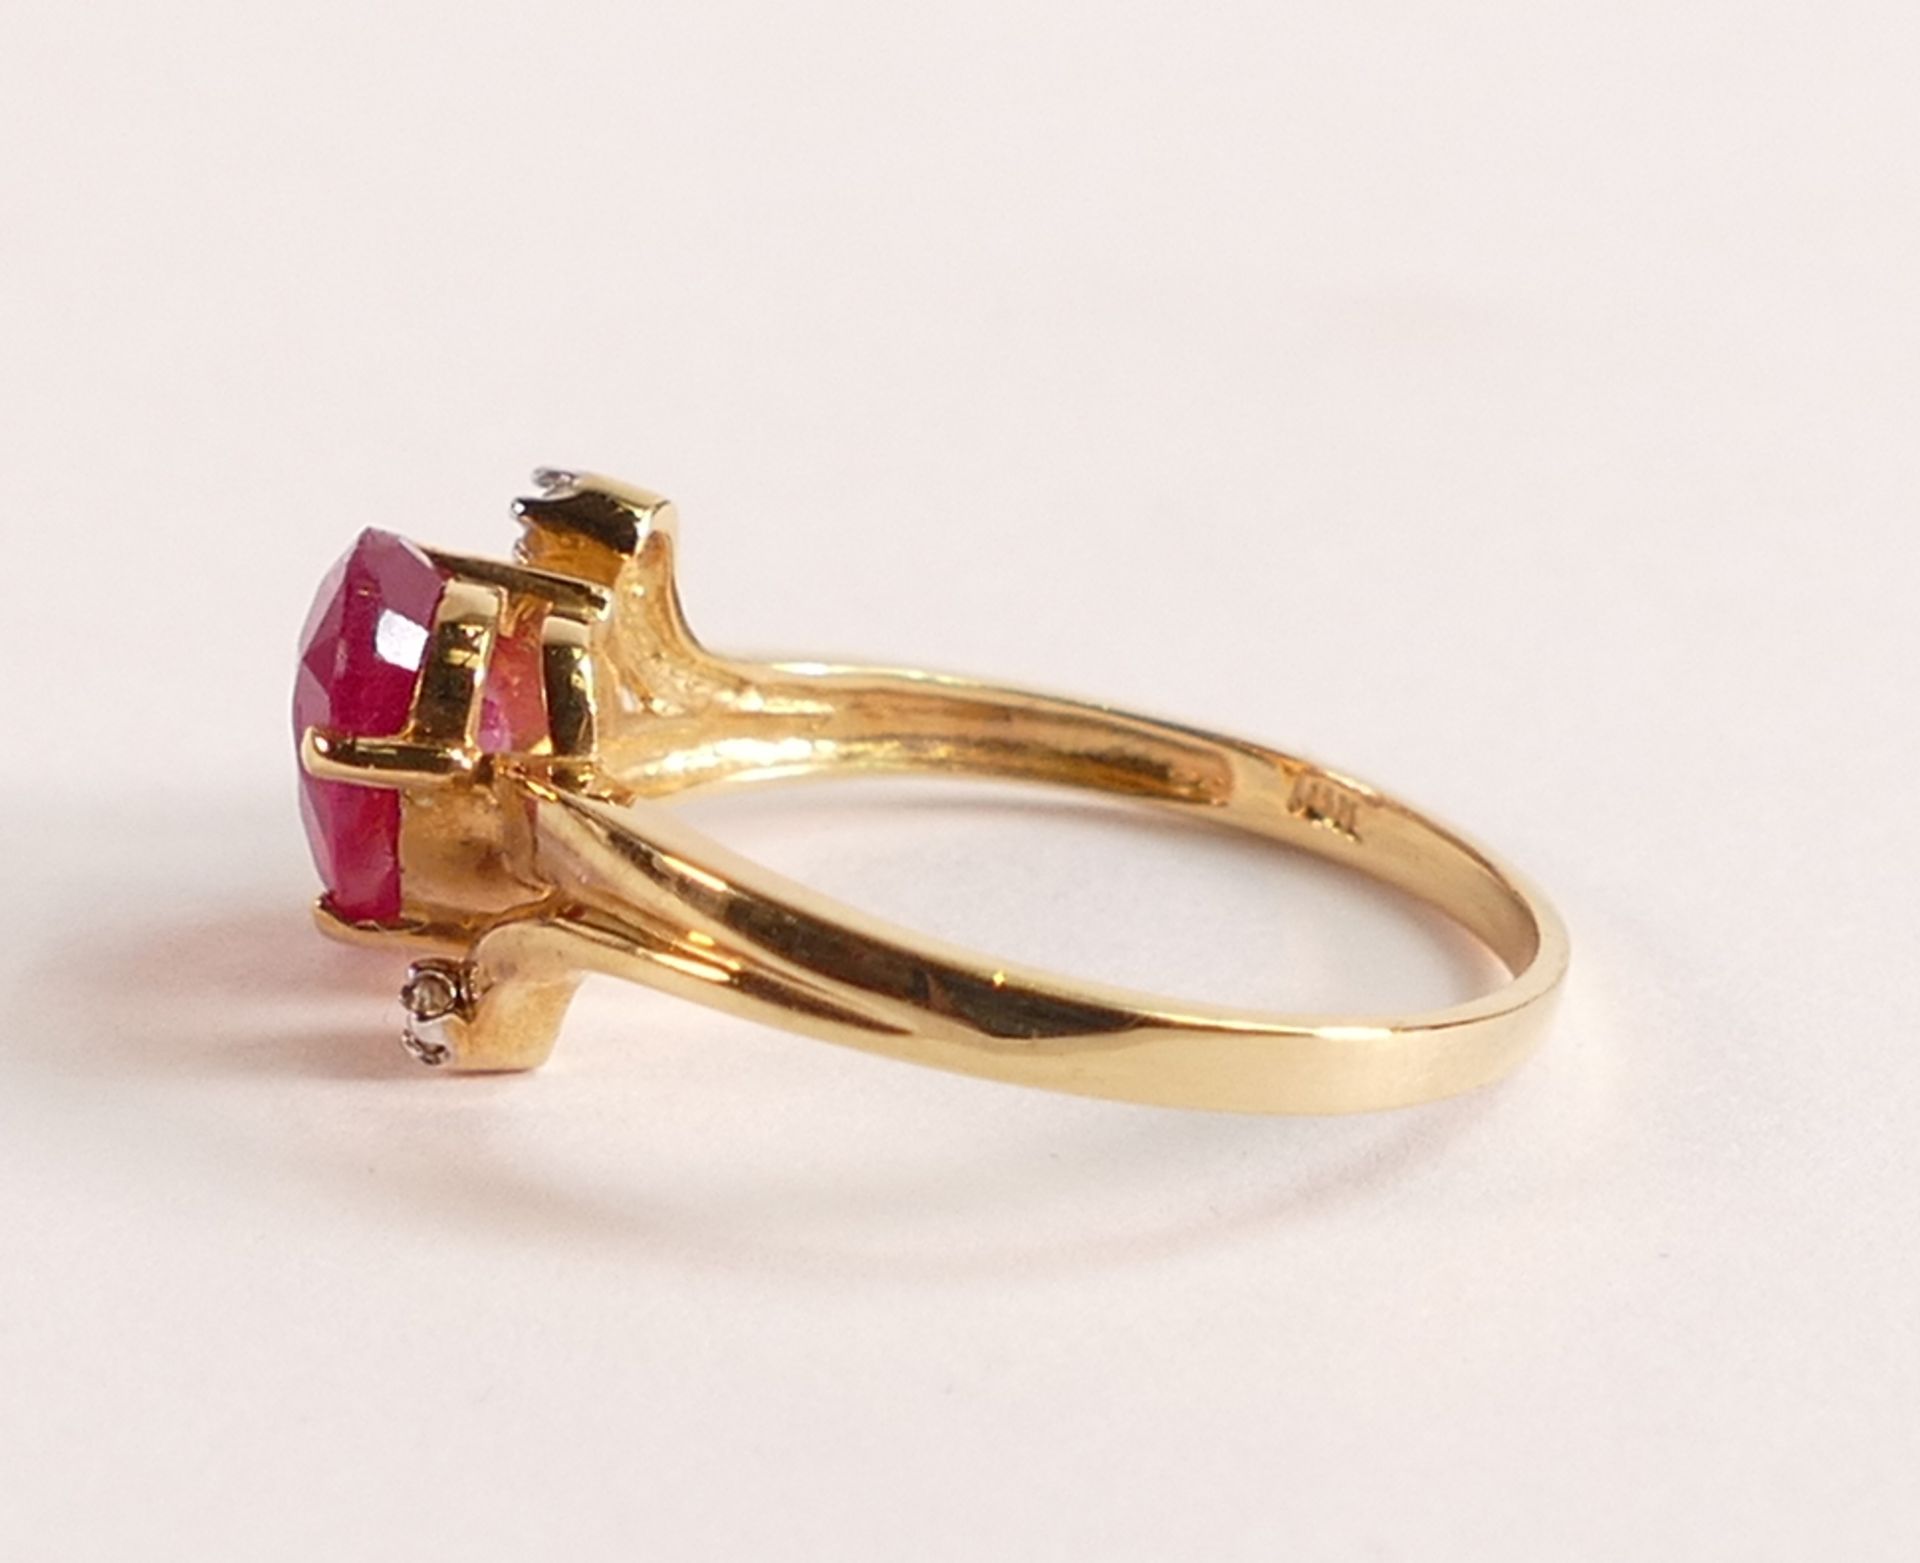 18ct Gold Ring with Ruby and Diamond - Ring size N 1/2, weight 2.5 grams. Pear shaped Ruby measure - Image 2 of 3